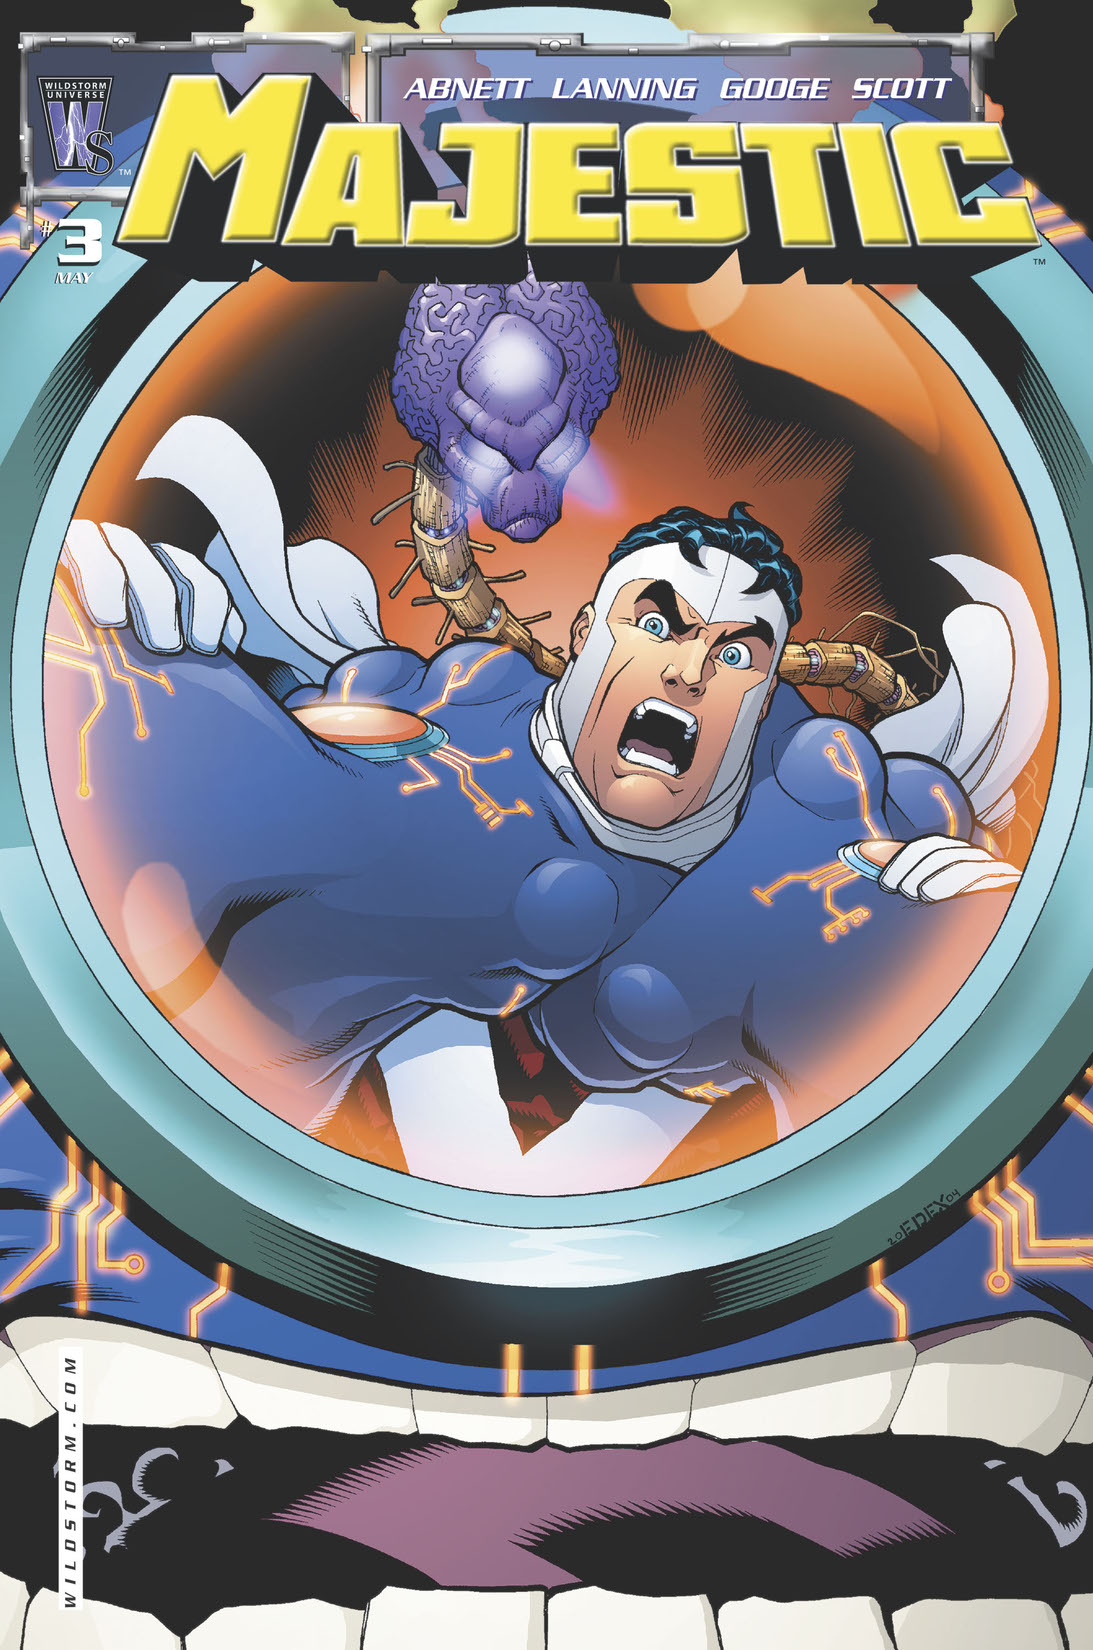 Majestic (2005-) #3 preview images